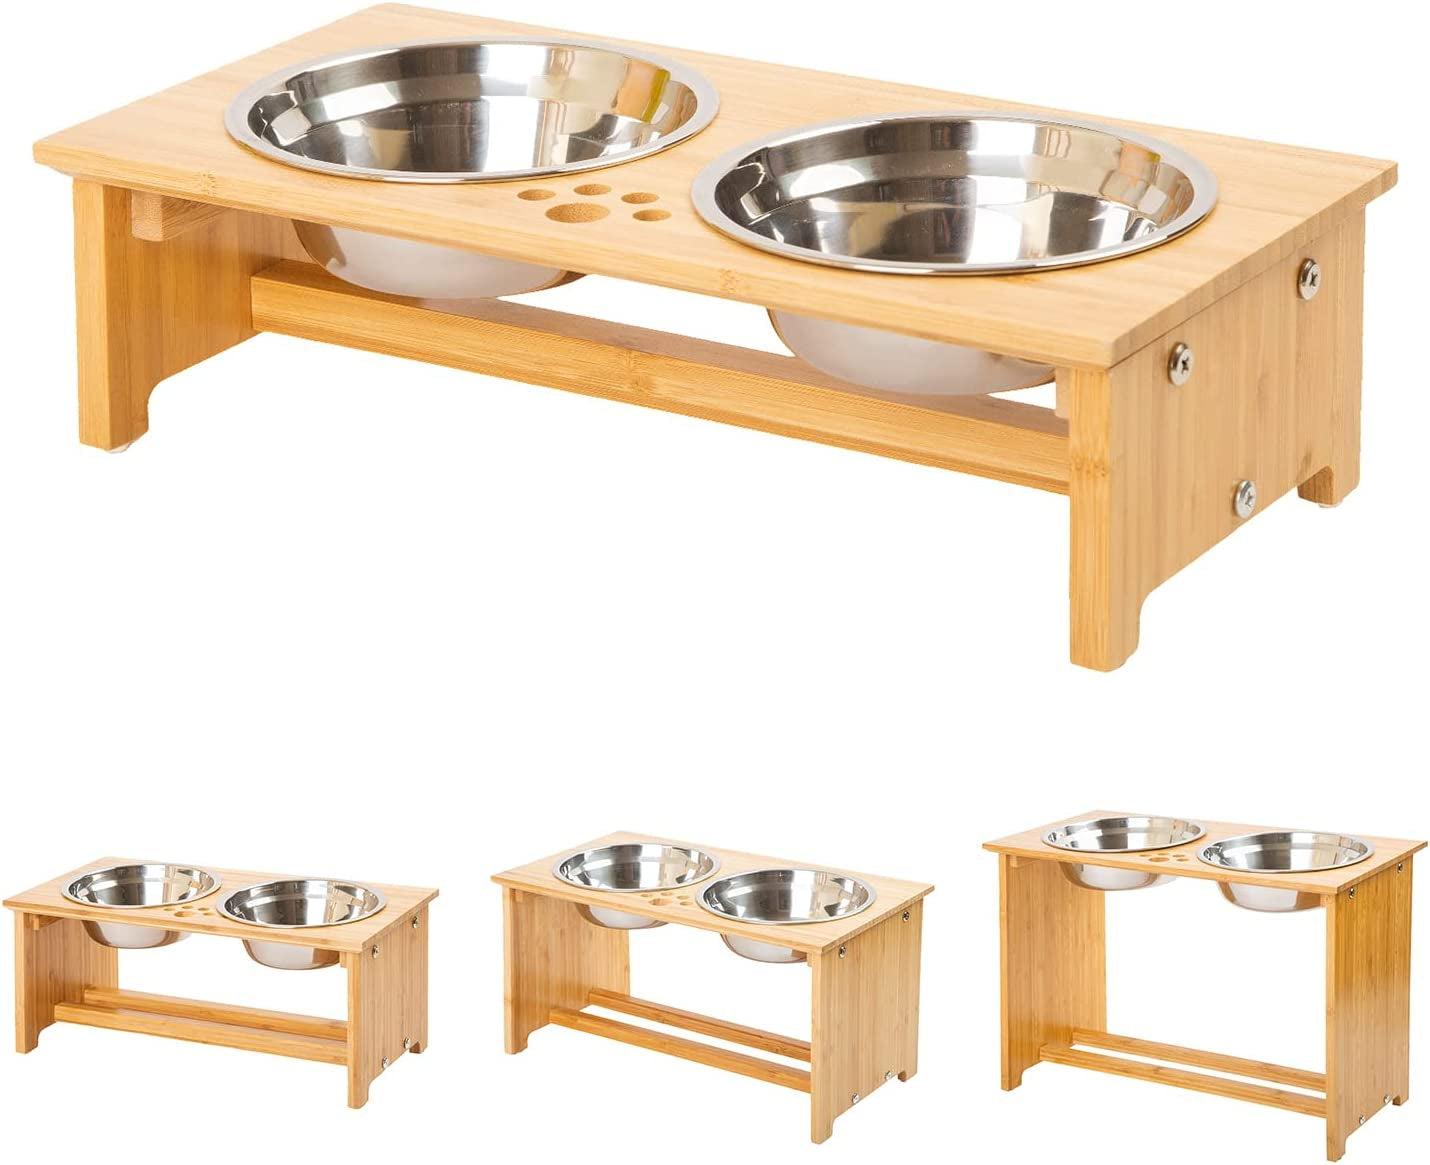 Raised Pet Bowls for Cats and Small Dogs, Bamboo Elevated Dog Cat Food and Water Bowls Stand Feeder with 2 Stainless Steel Bowls and anti Slip Feet (4'' Tall-20 Oz Bowl)